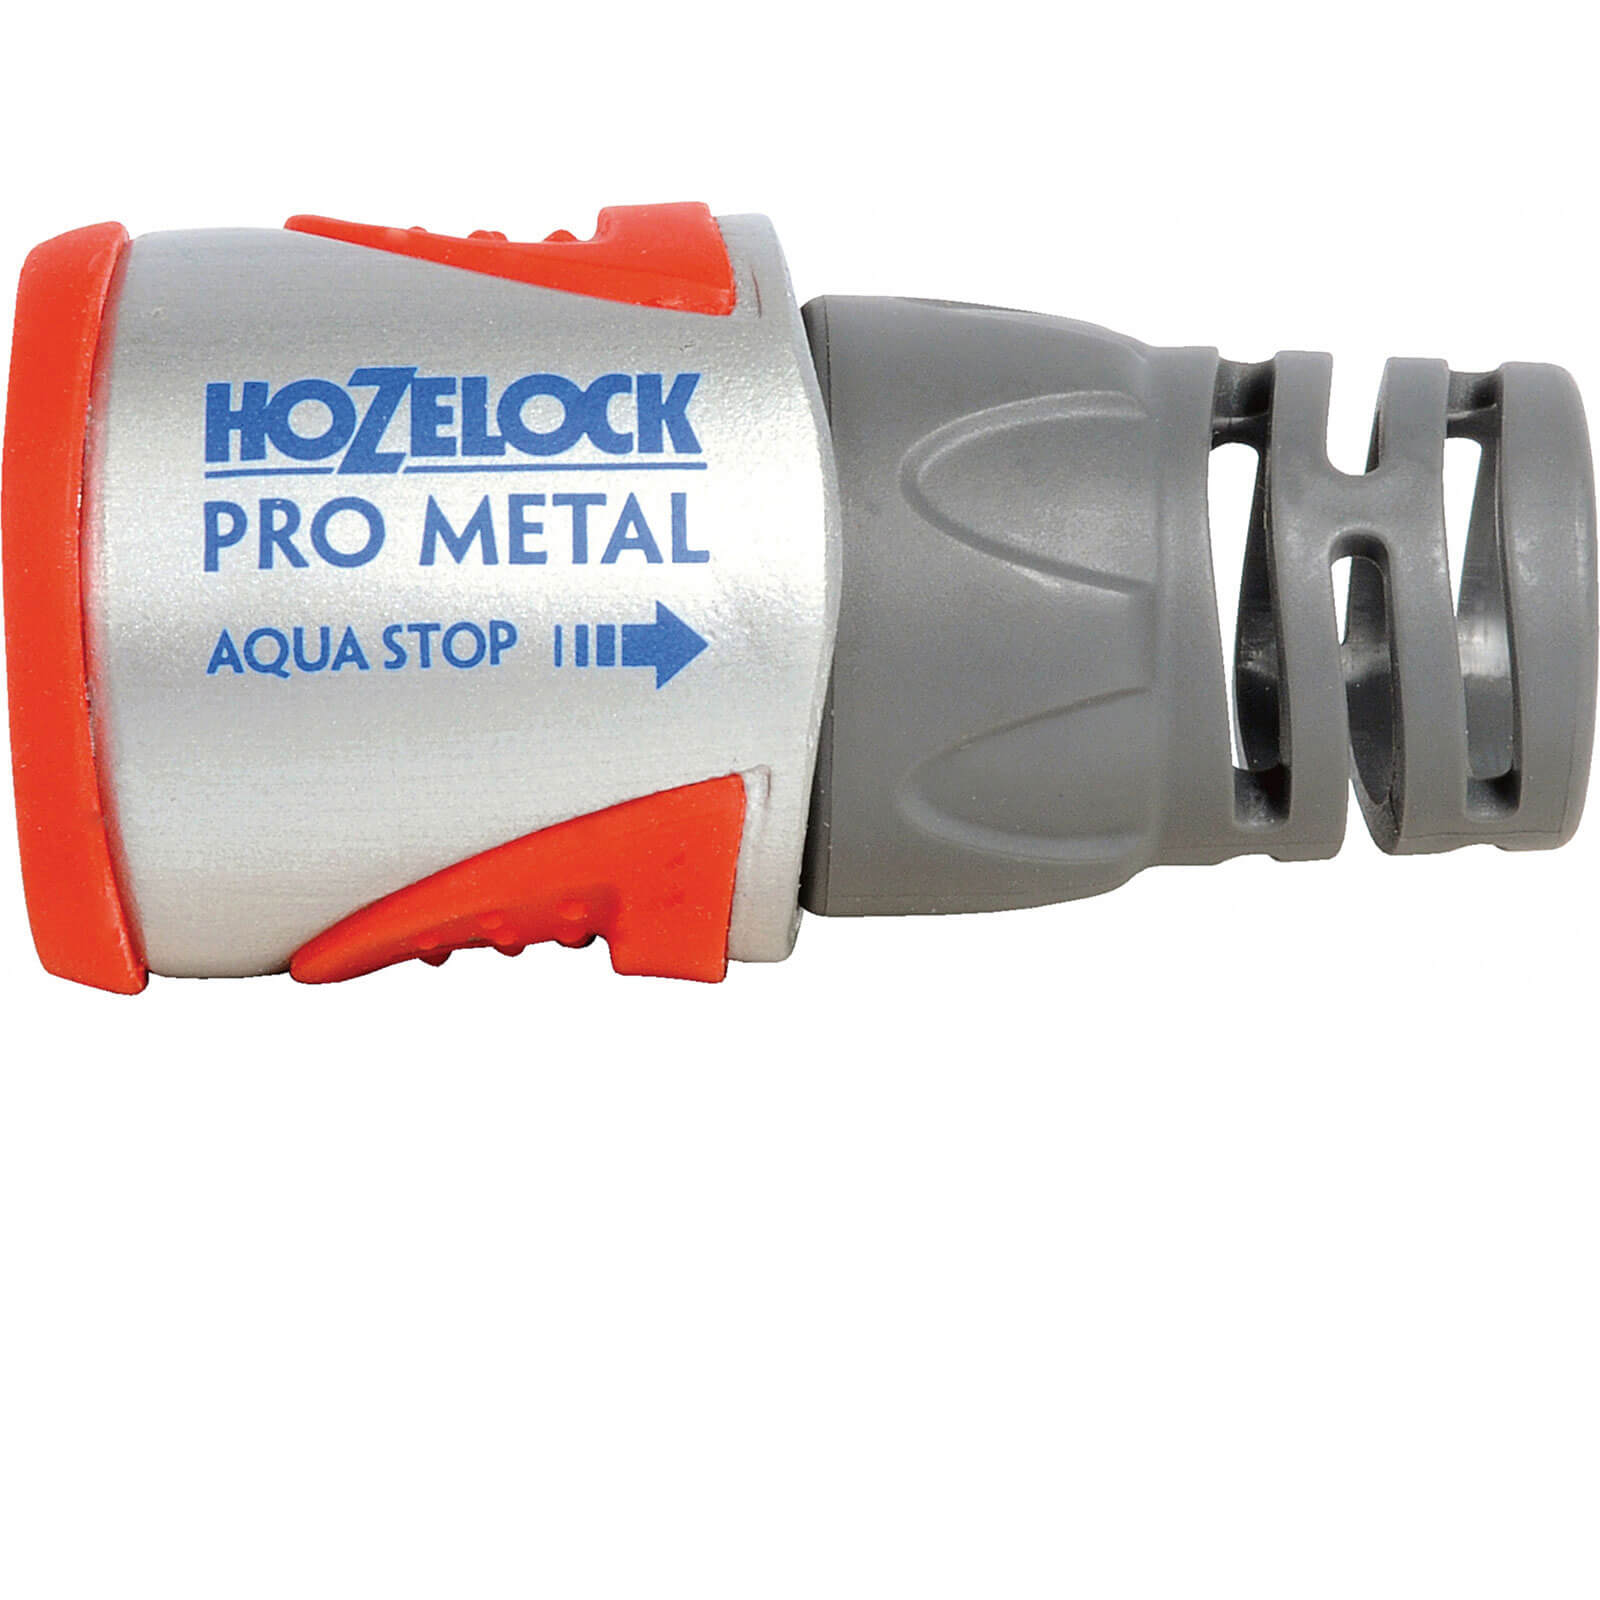 Image of Hozelock Pro Metal AquaStop Hose Pipe Connector 1/2" / 12.5mm Pack of 1